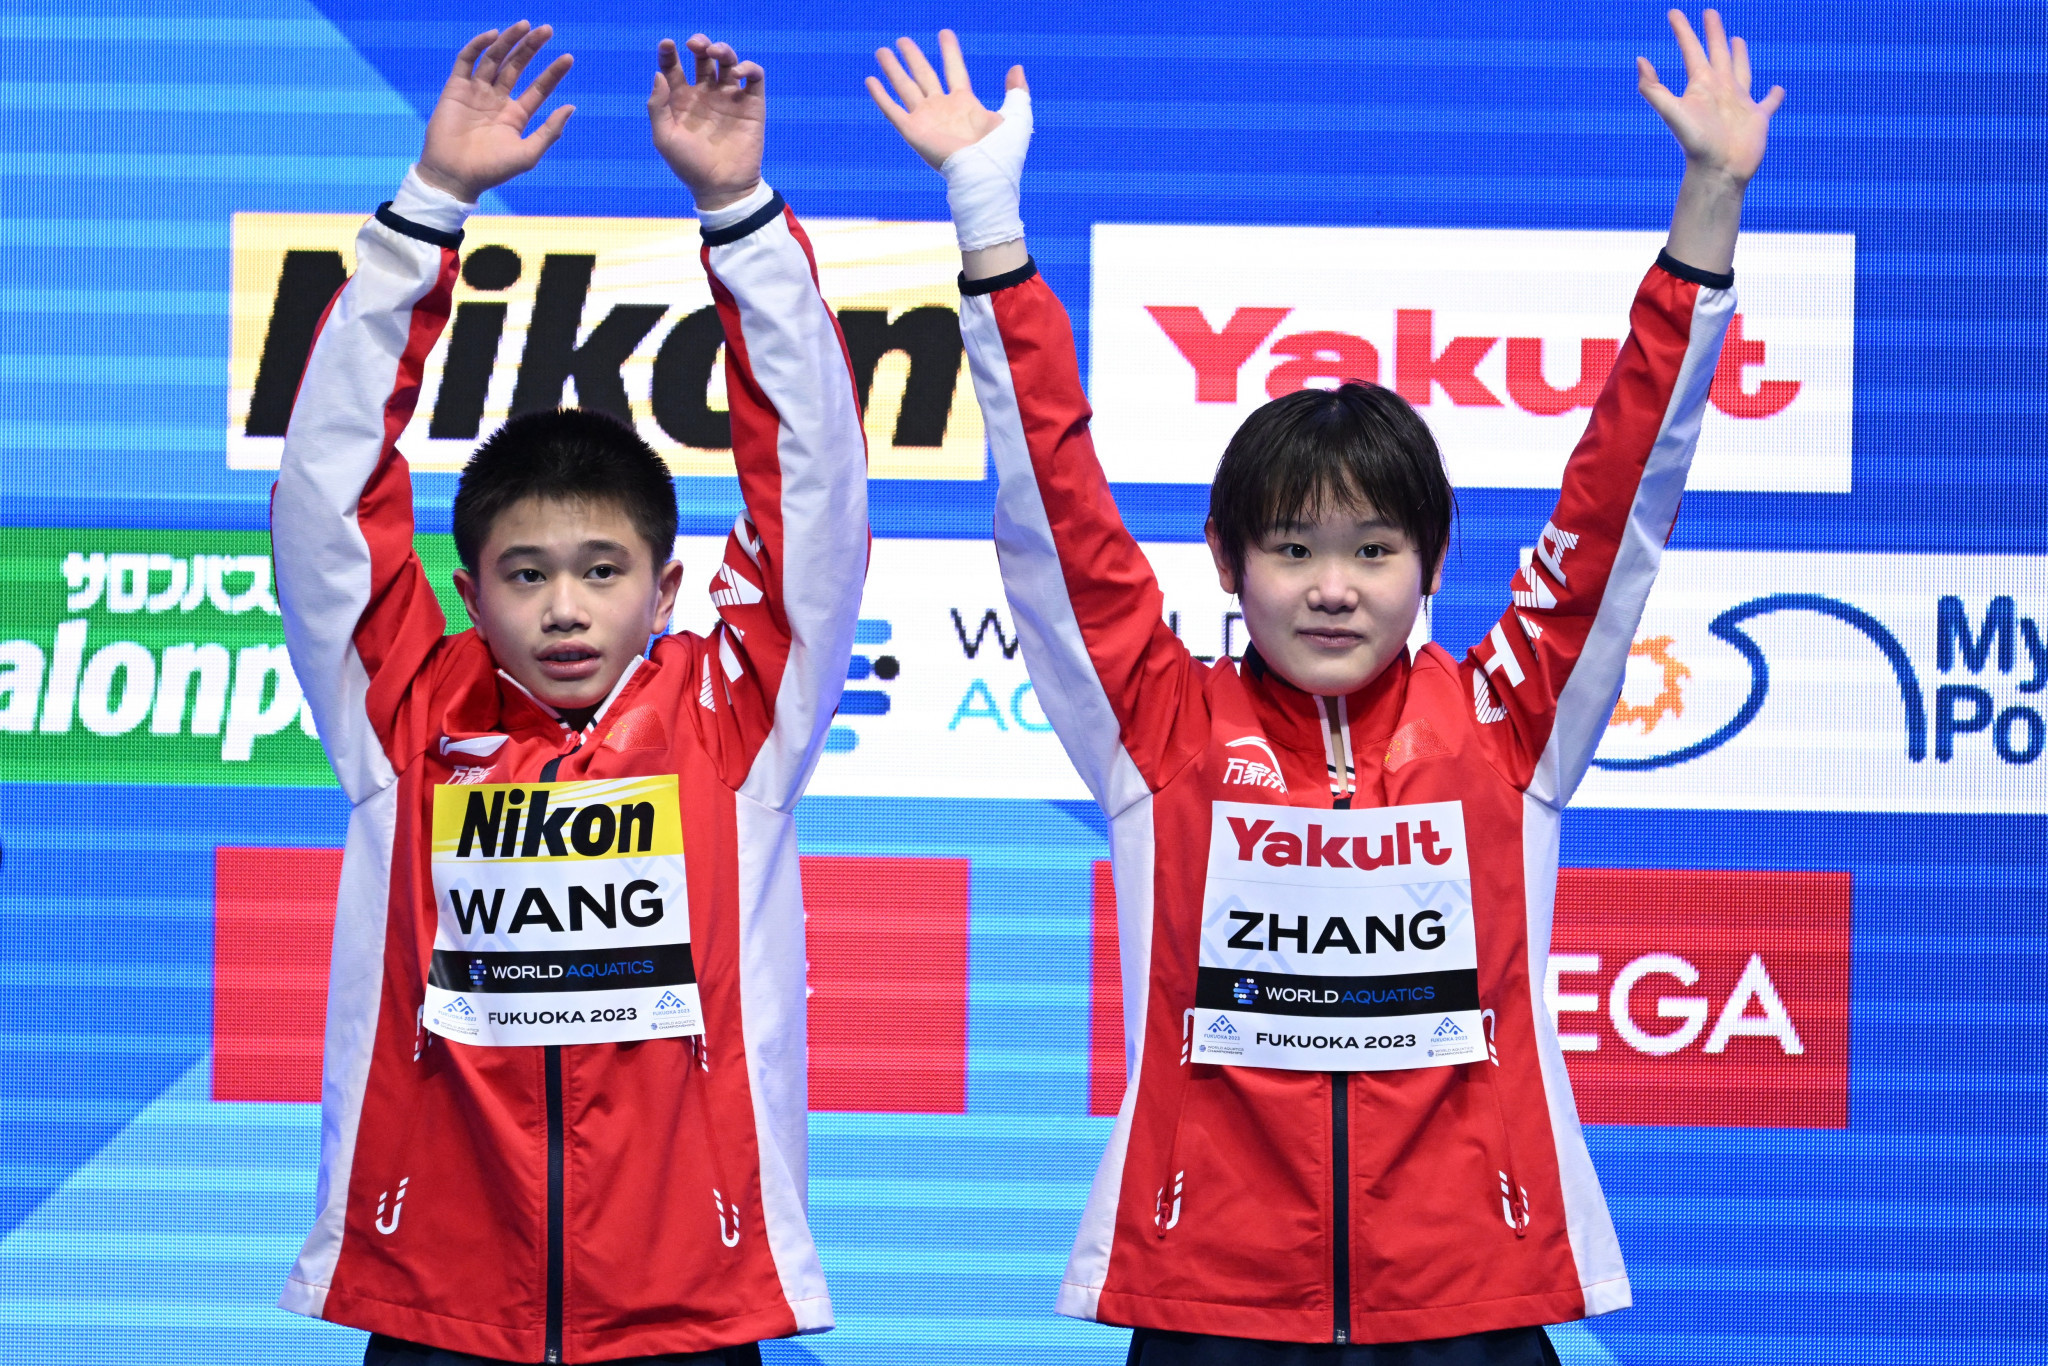 Chinese delight in diving as Japan win artistic swimming gold at Fukuoka 2023